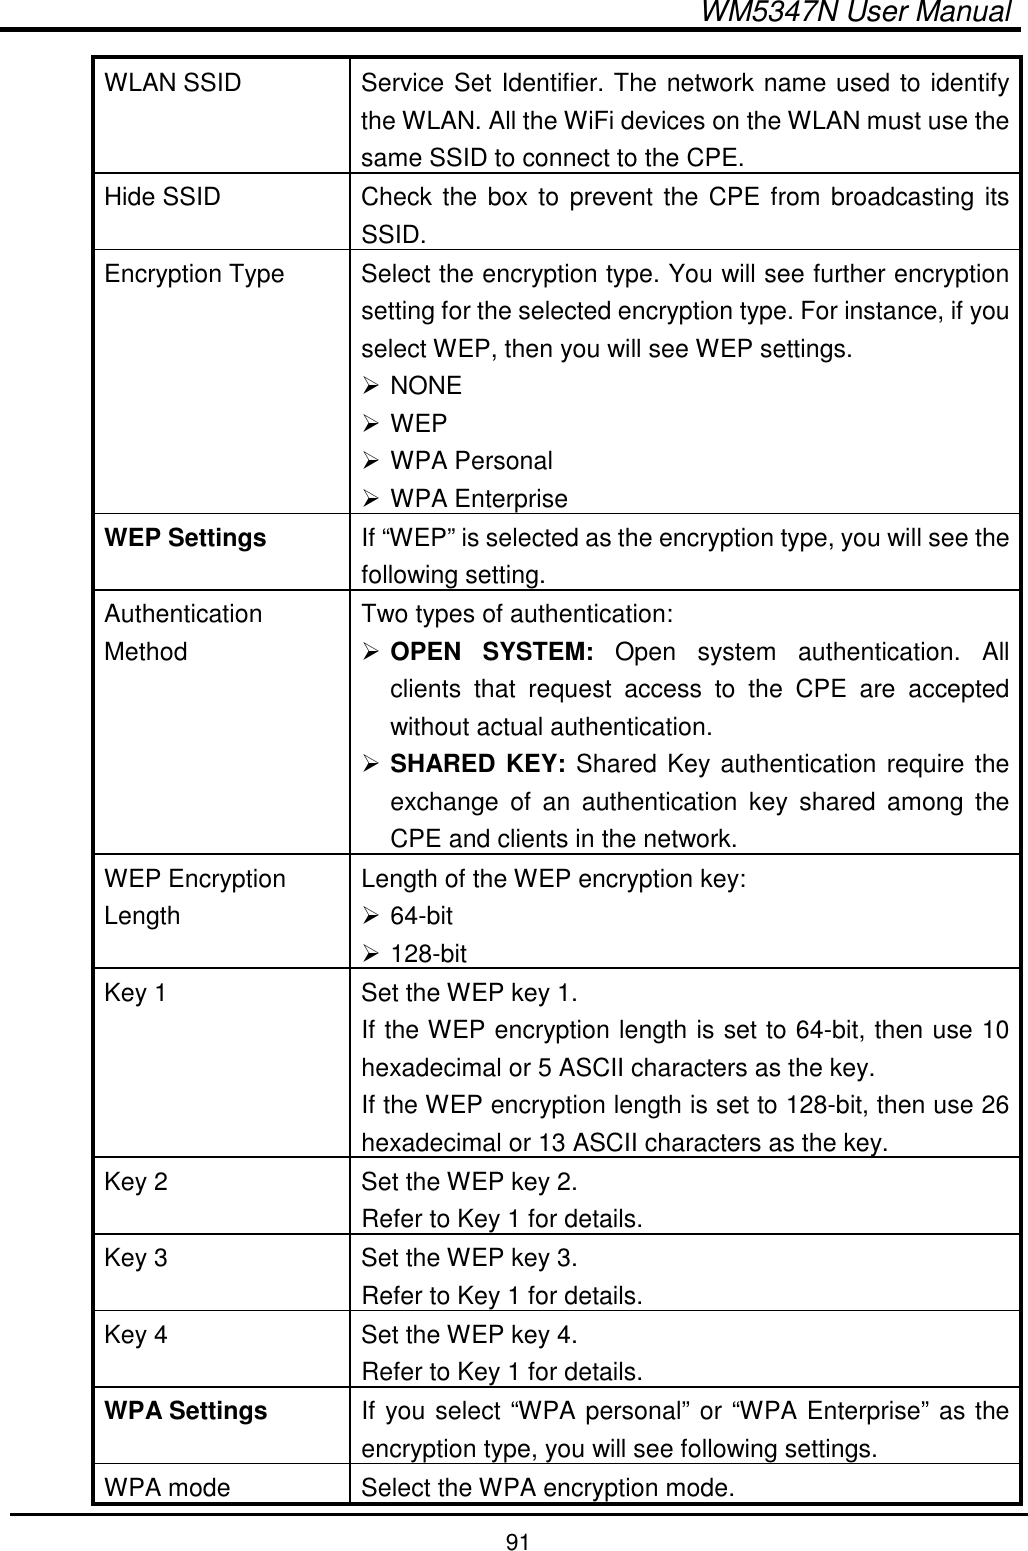  WM5347N User Manual  91 WLAN SSID  Service Set Identifier. The network name used to identify the WLAN. All the WiFi devices on the WLAN must use the same SSID to connect to the CPE. Hide SSID  Check the box to prevent the CPE from broadcasting its SSID. Encryption Type  Select the encryption type. You will see further encryption setting for the selected encryption type. For instance, if you select WEP, then you will see WEP settings.  NONE  WEP  WPA Personal  WPA Enterprise WEP Settings  If “WEP” is selected as the encryption type, you will see the following setting. Authentication Method Two types of authentication:  OPEN  SYSTEM:  Open  system  authentication.  All clients  that  request  access  to  the  CPE  are  accepted without actual authentication.  SHARED KEY: Shared Key authentication require the exchange  of  an  authentication  key  shared  among  the CPE and clients in the network. WEP Encryption Length Length of the WEP encryption key:  64-bit  128-bit Key 1  Set the WEP key 1. If the WEP encryption length is set to 64-bit, then use 10 hexadecimal or 5 ASCII characters as the key. If the WEP encryption length is set to 128-bit, then use 26 hexadecimal or 13 ASCII characters as the key. Key 2  Set the WEP key 2. Refer to Key 1 for details. Key 3  Set the WEP key 3. Refer to Key 1 for details. Key 4  Set the WEP key 4. Refer to Key 1 for details. WPA Settings  If you select “WPA personal” or “WPA Enterprise” as the encryption type, you will see following settings. WPA mode  Select the WPA encryption mode. 